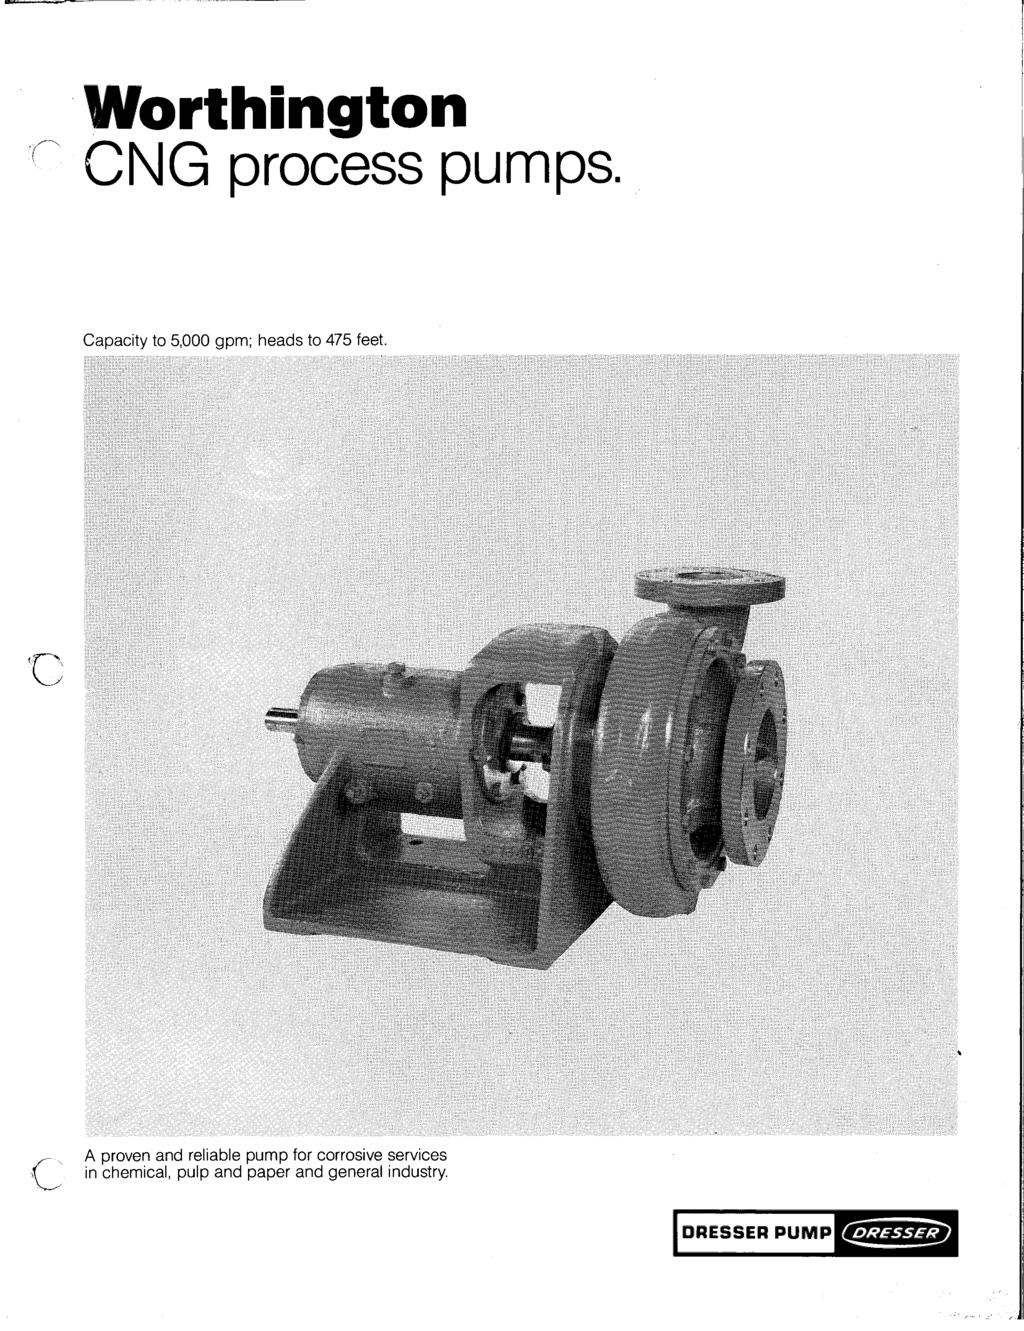 Worthington CNG process pumps. Capacity to 5,000 gpm; heads to 475 feet.